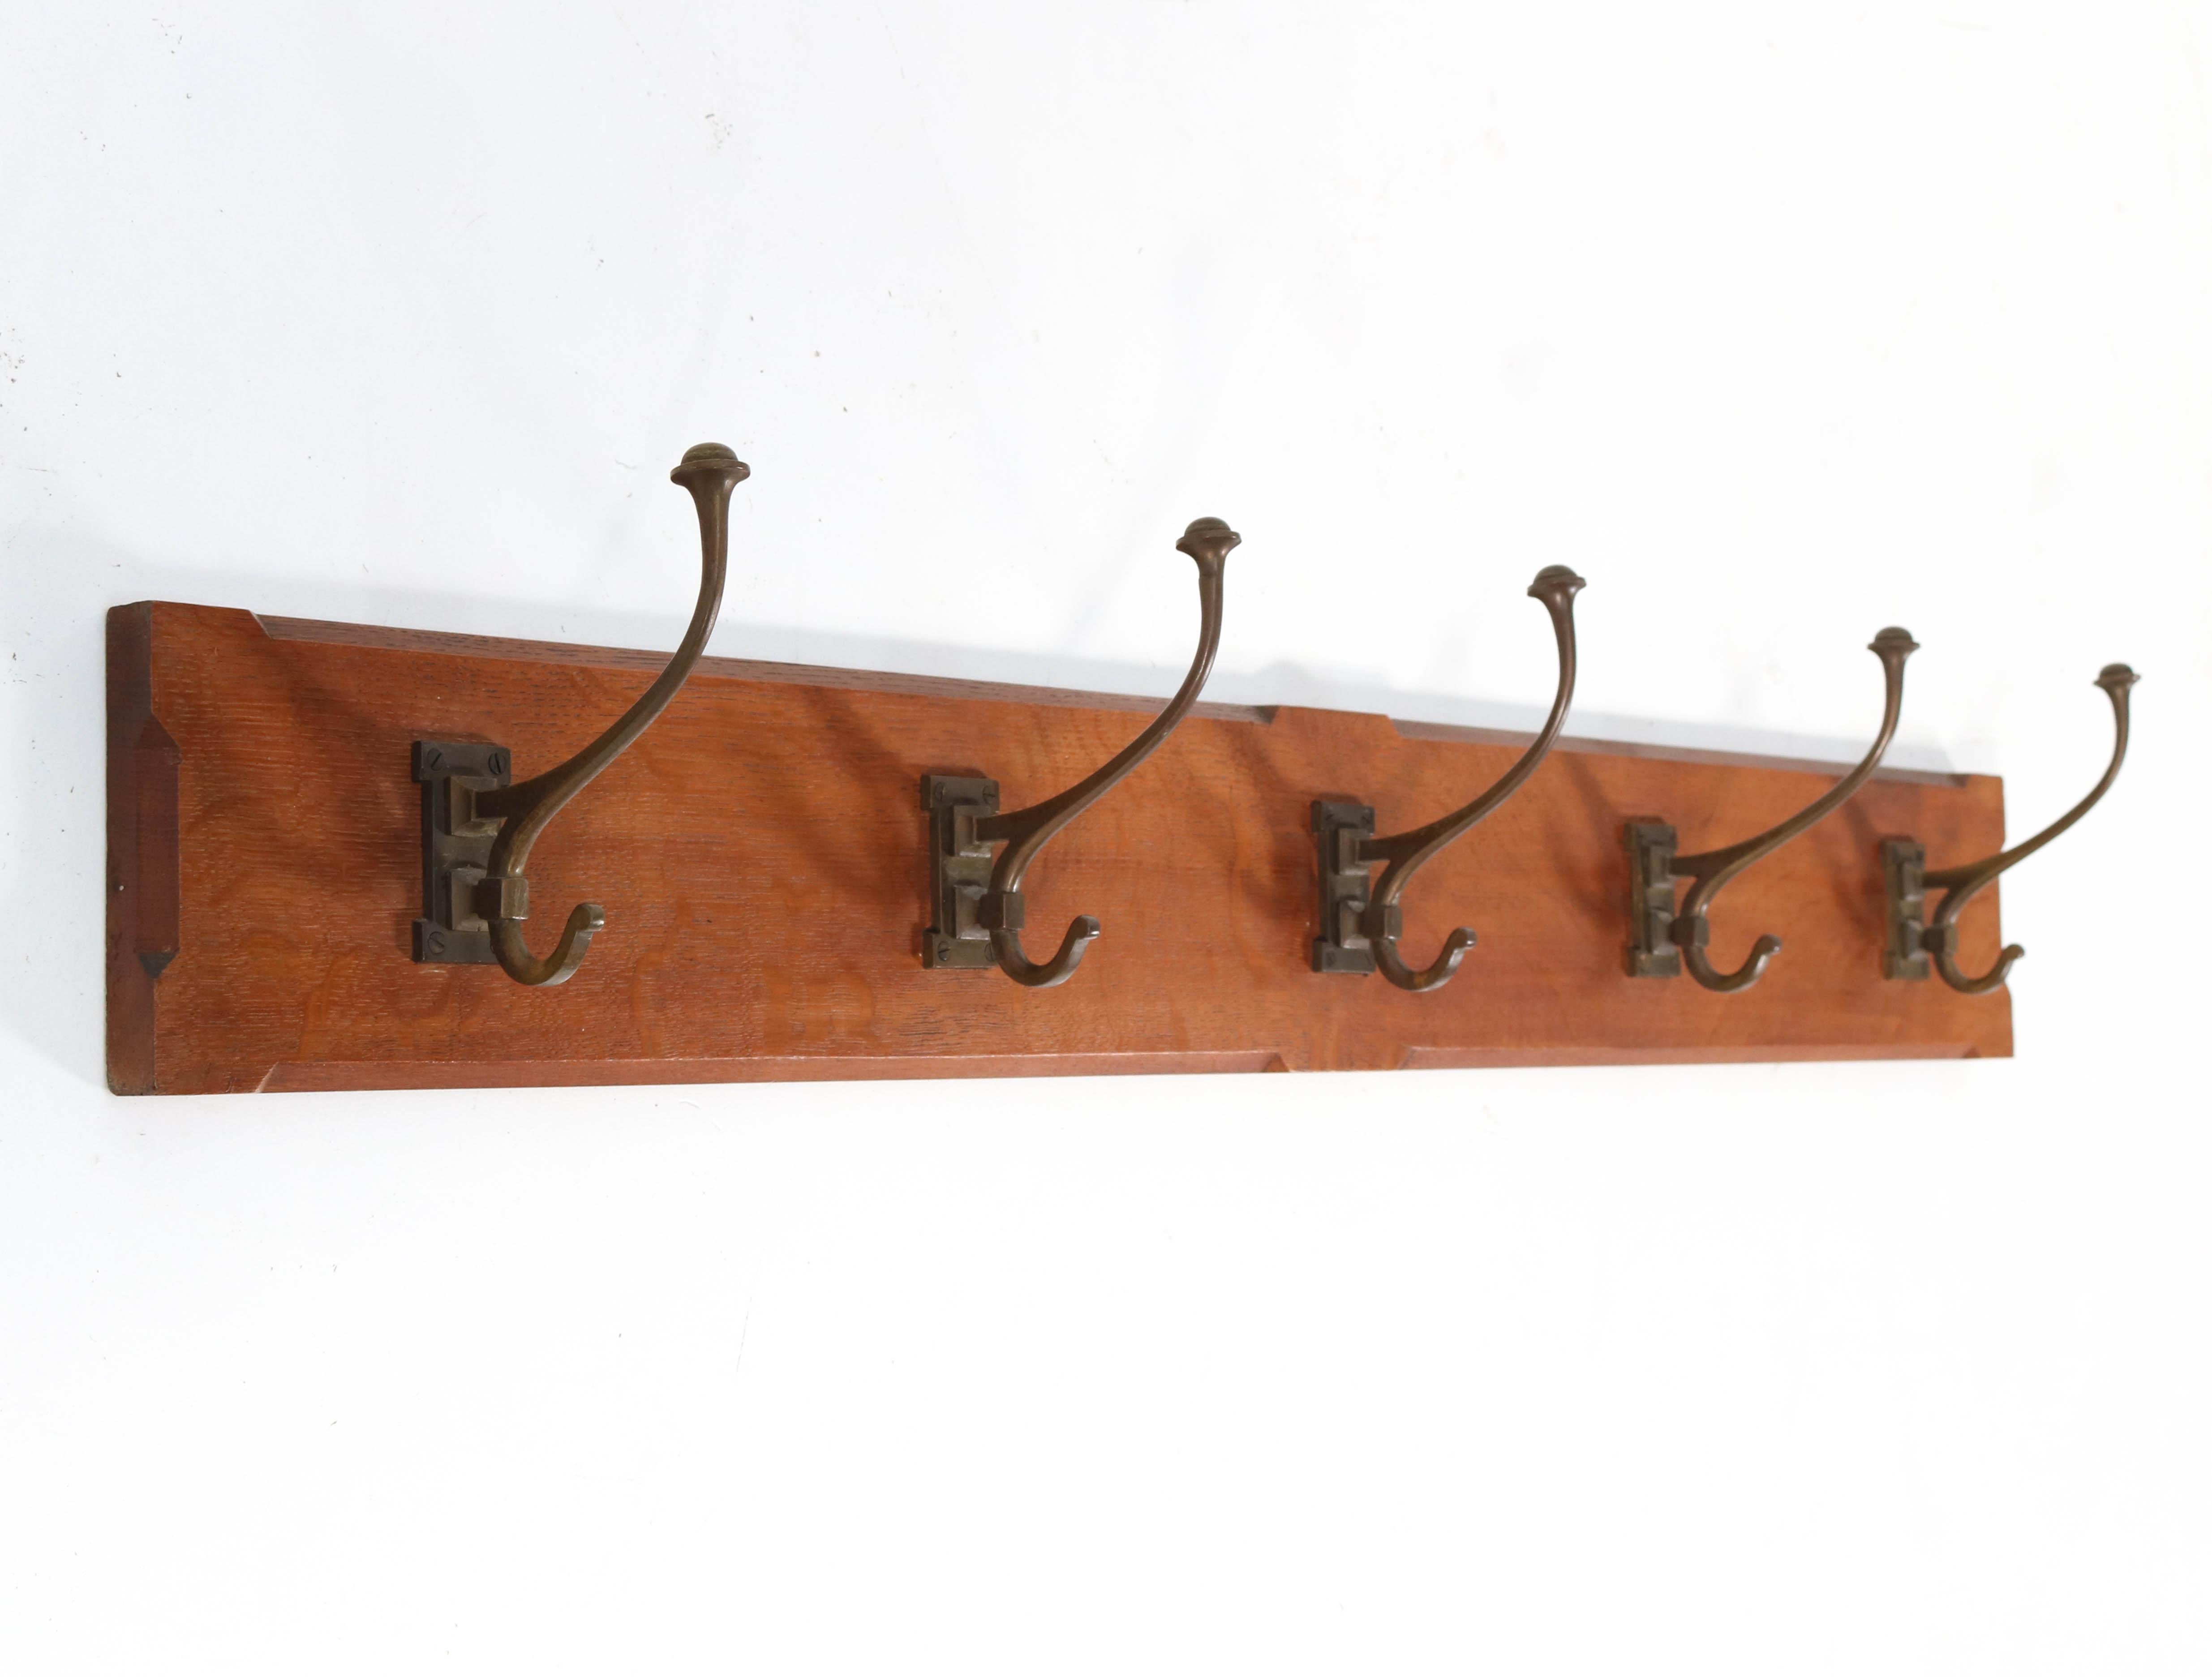 Wonderful and rare Arts & Crafts Art Nouveau coat rack.
Attributed to A.J. Kropholler.
Striking Dutch design from the 1900s.
Solid oak with five original bronze hooks.
Please note the craftsmanship of the magnificent hooks!
In very good